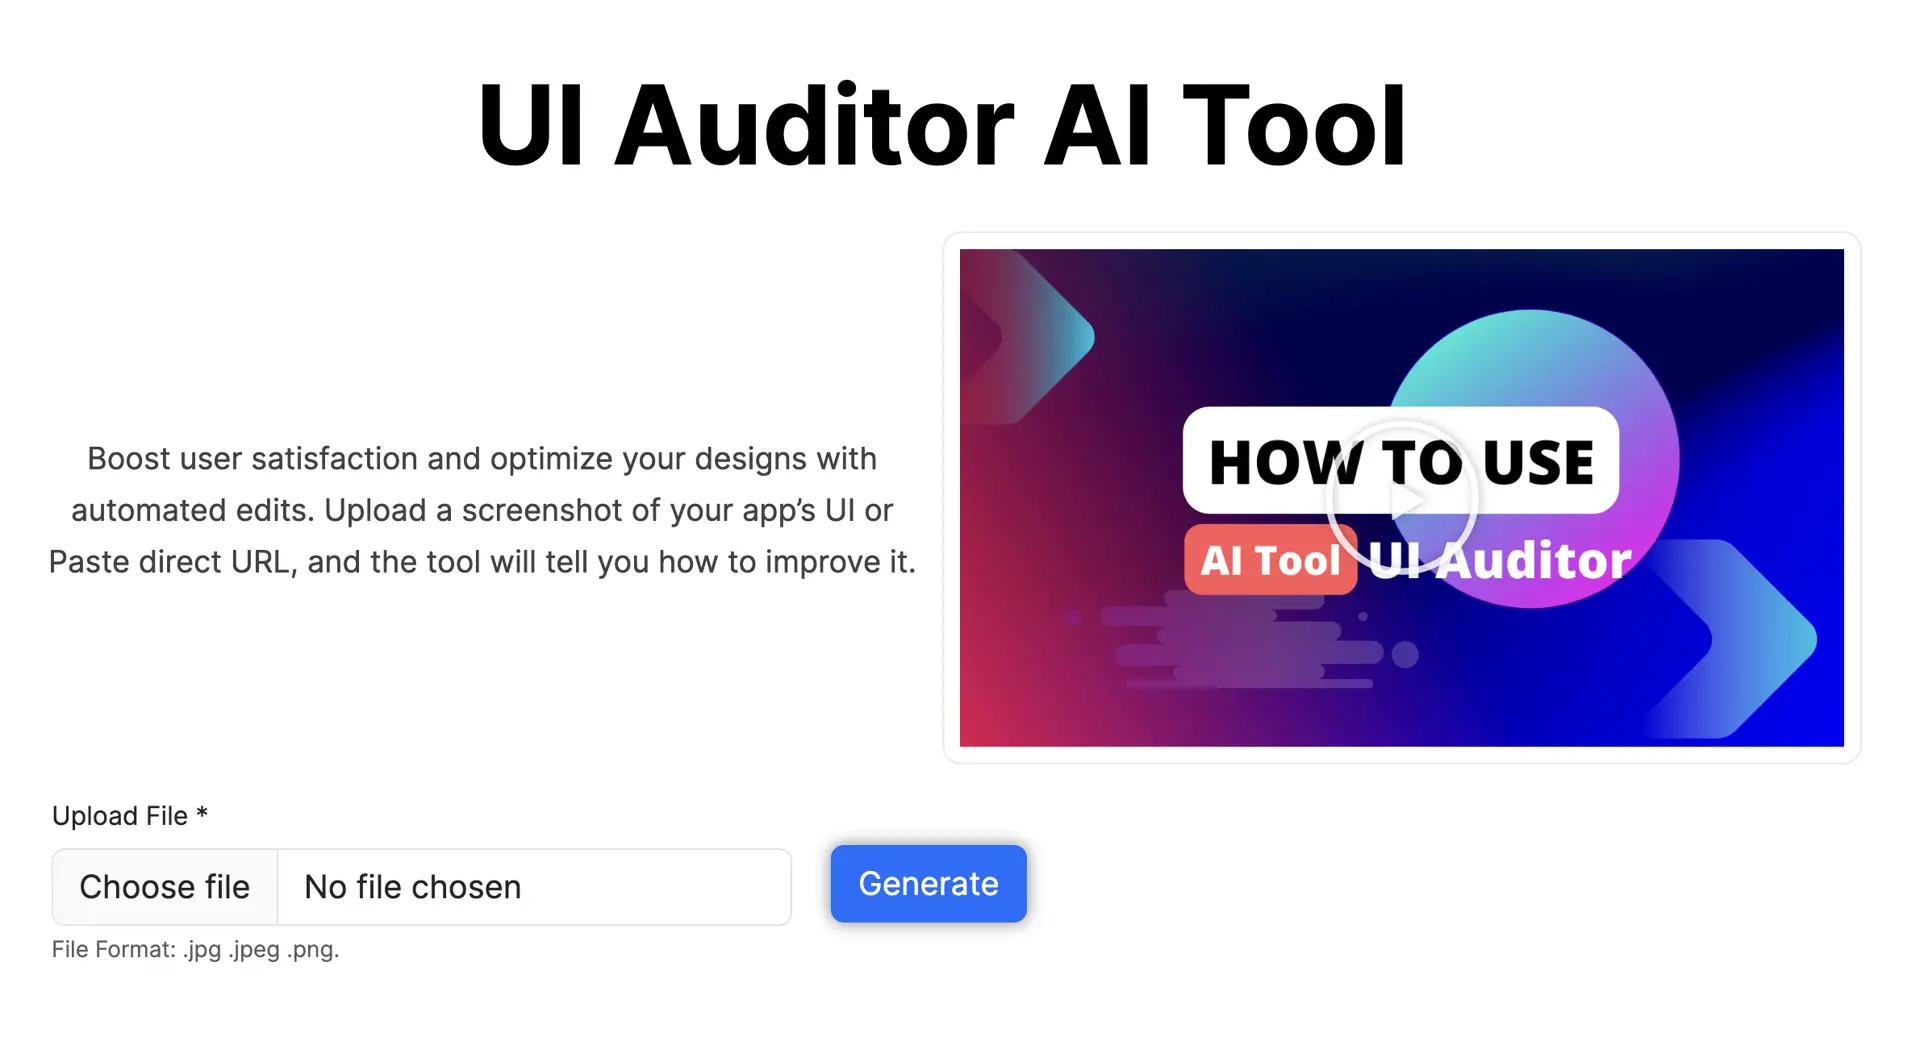 UI Auditor AI Toolwebsite picture